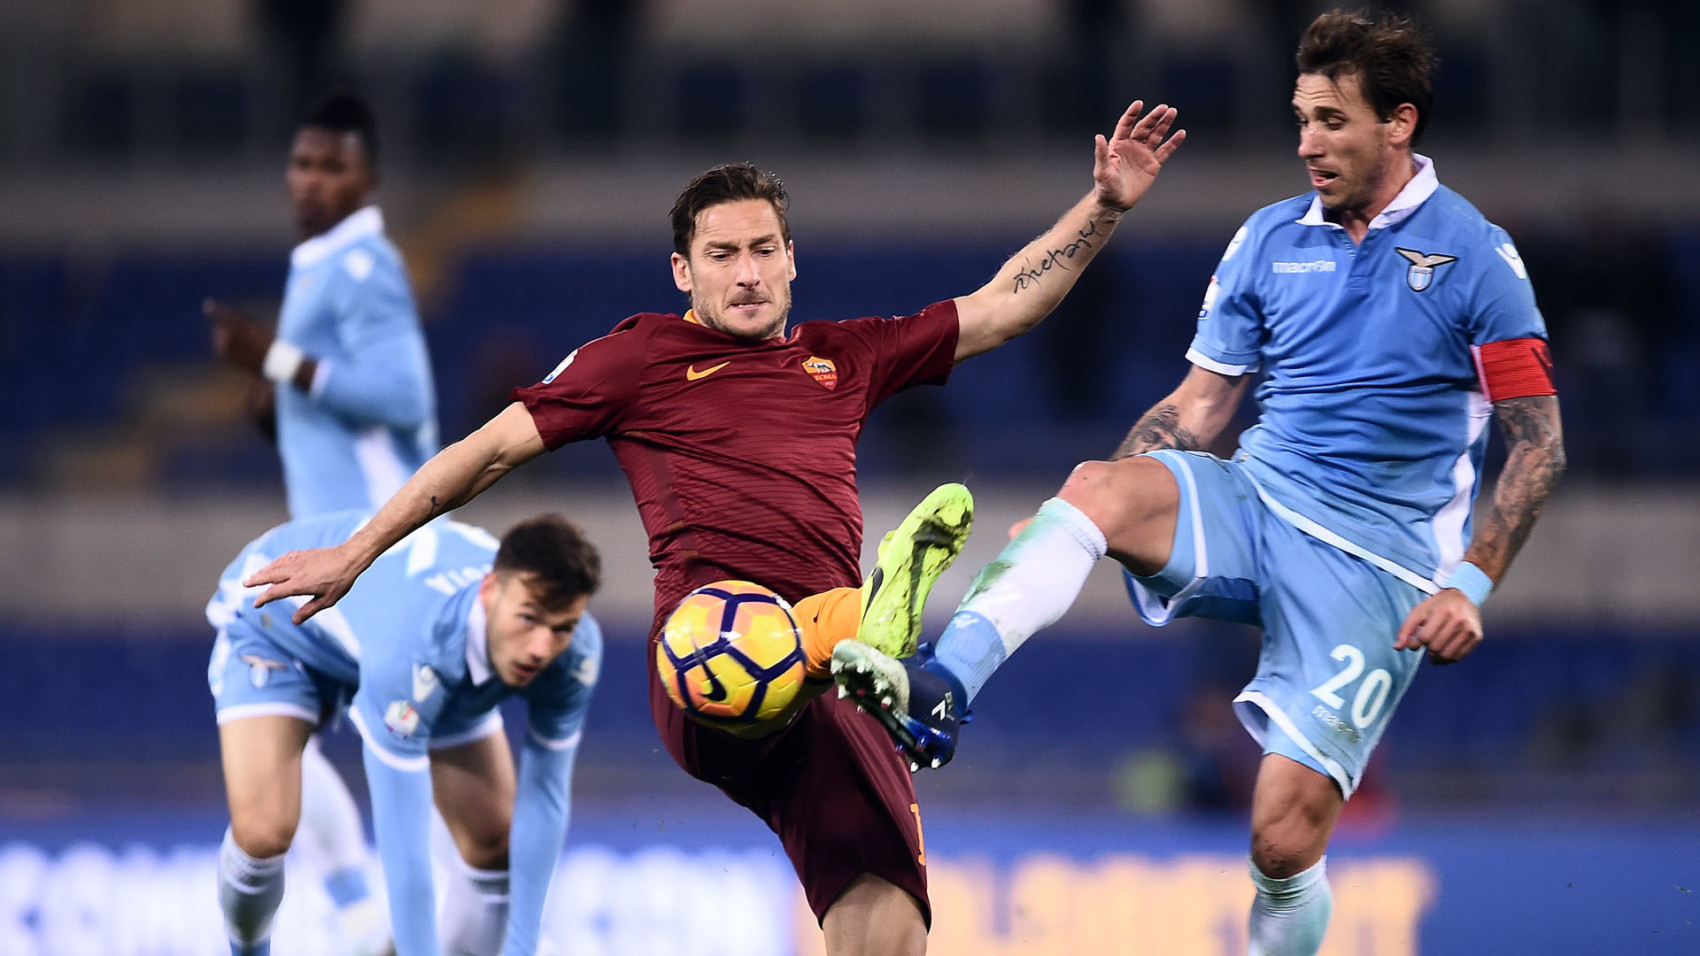 Roma's forward from Italy Francesco Totti (C) vies with Lazio's midfielder from Argentina Lucas Biglia during the Italian TIM Cup 1st leg semifinal football match on March 1, 2017 at the Olympic stadium in Rome.  / AFP PHOTO / FILIPPO MONTEFORTE        (Photo credit should read FILIPPO MONTEFORTE/AFP/Getty Images)